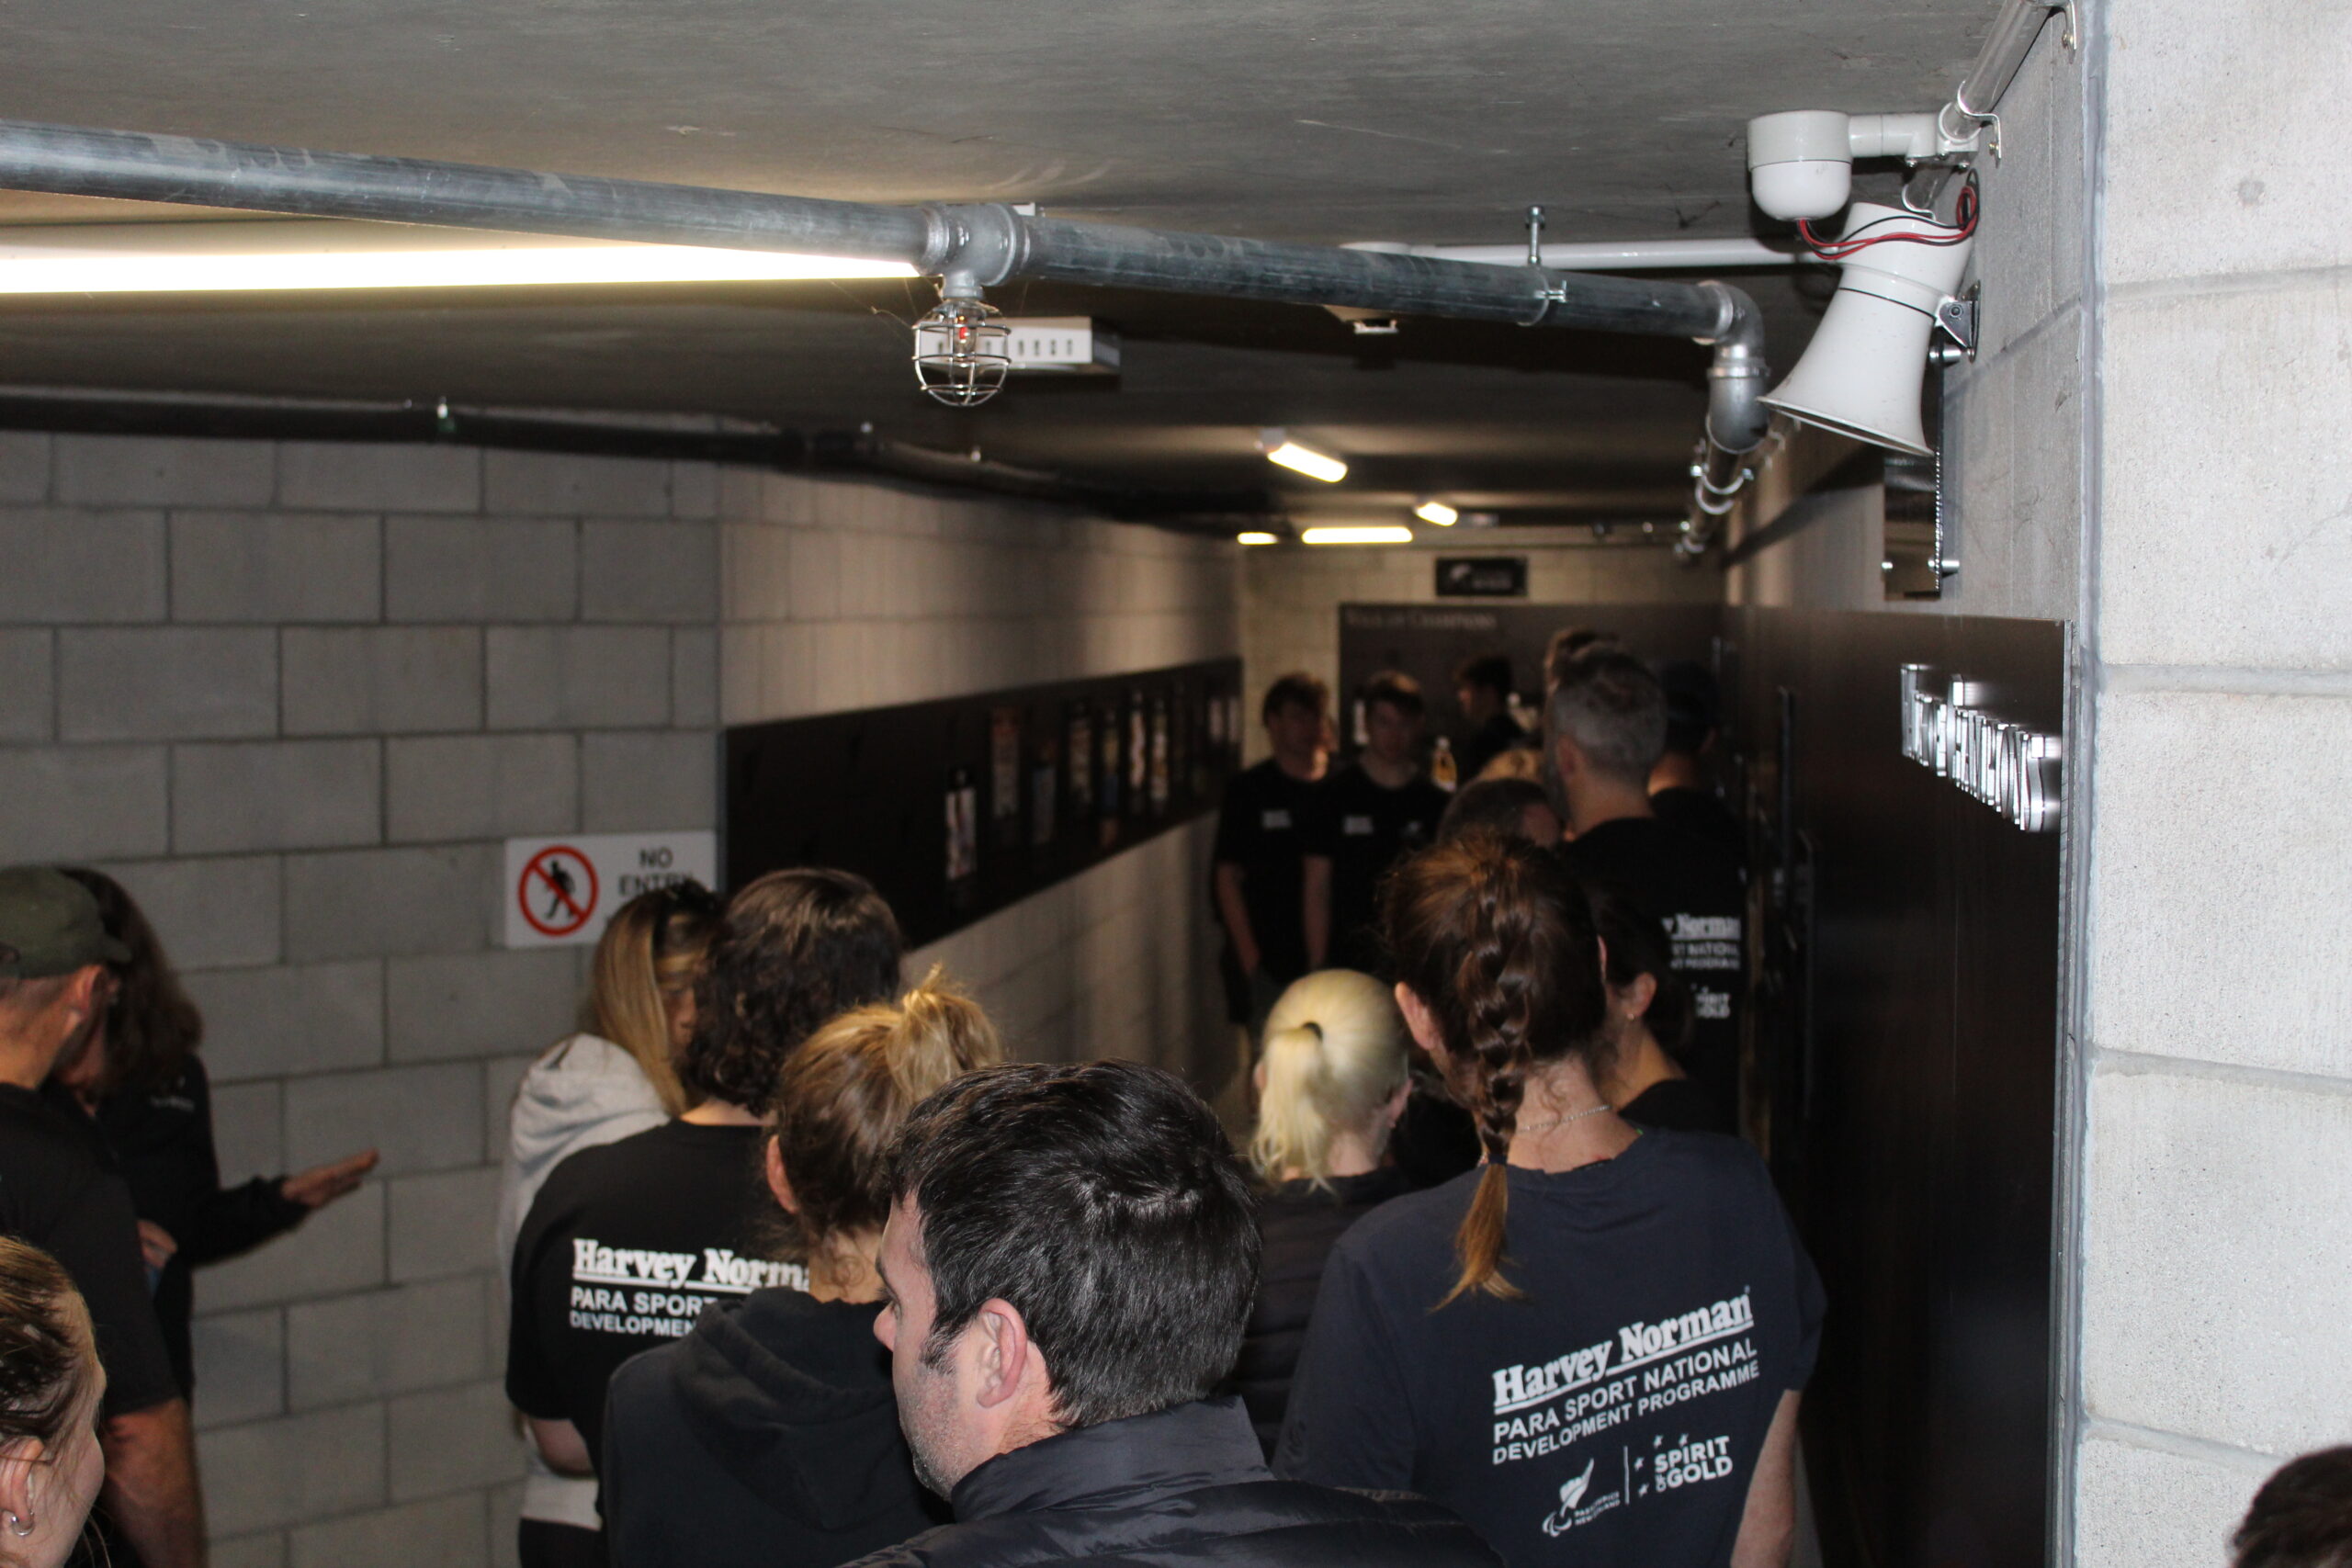 Group of people walking in the tunnel looking at plaques on the walls